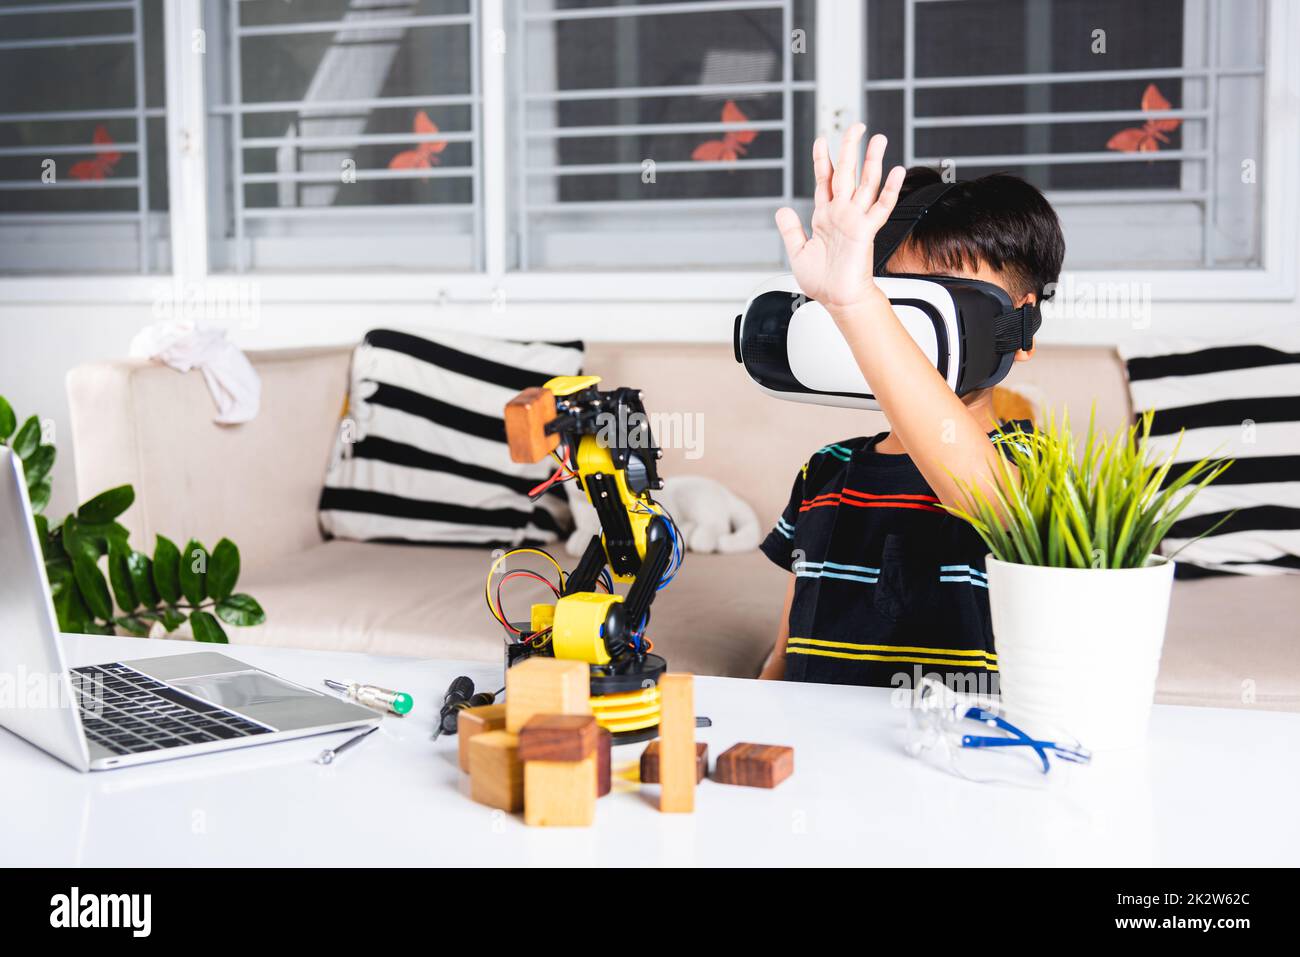 Asian kid boy using VR glasses on robotic arm in workshop Stock Photo